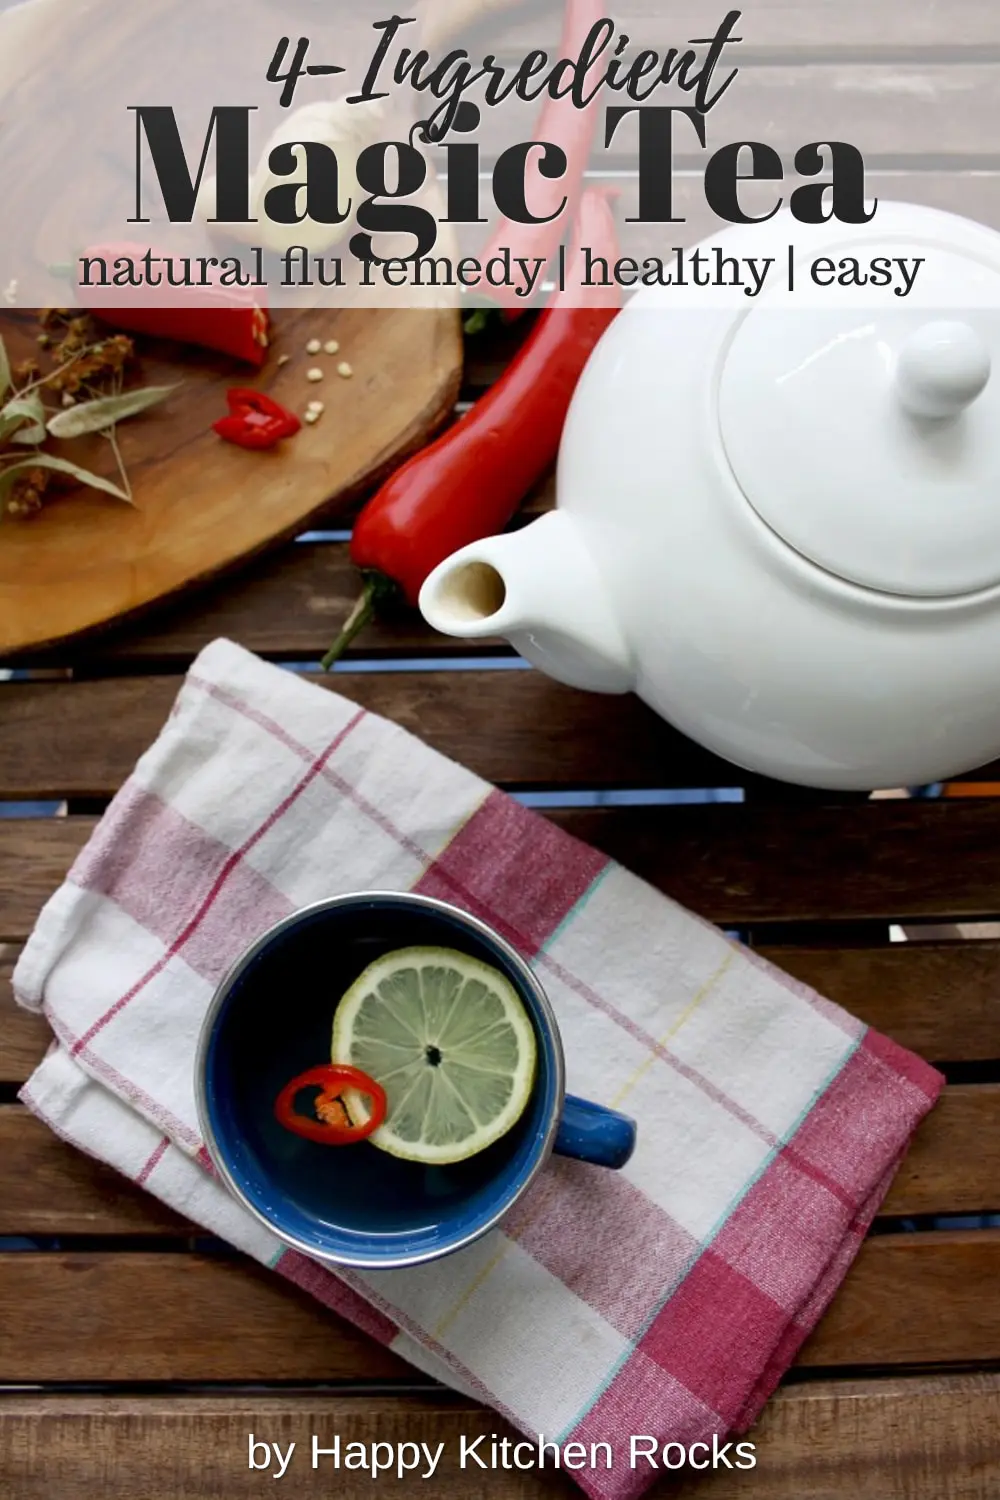 Natural Flu Remedy: Magic 4-Ingredient Tea Collage with Text Overlay